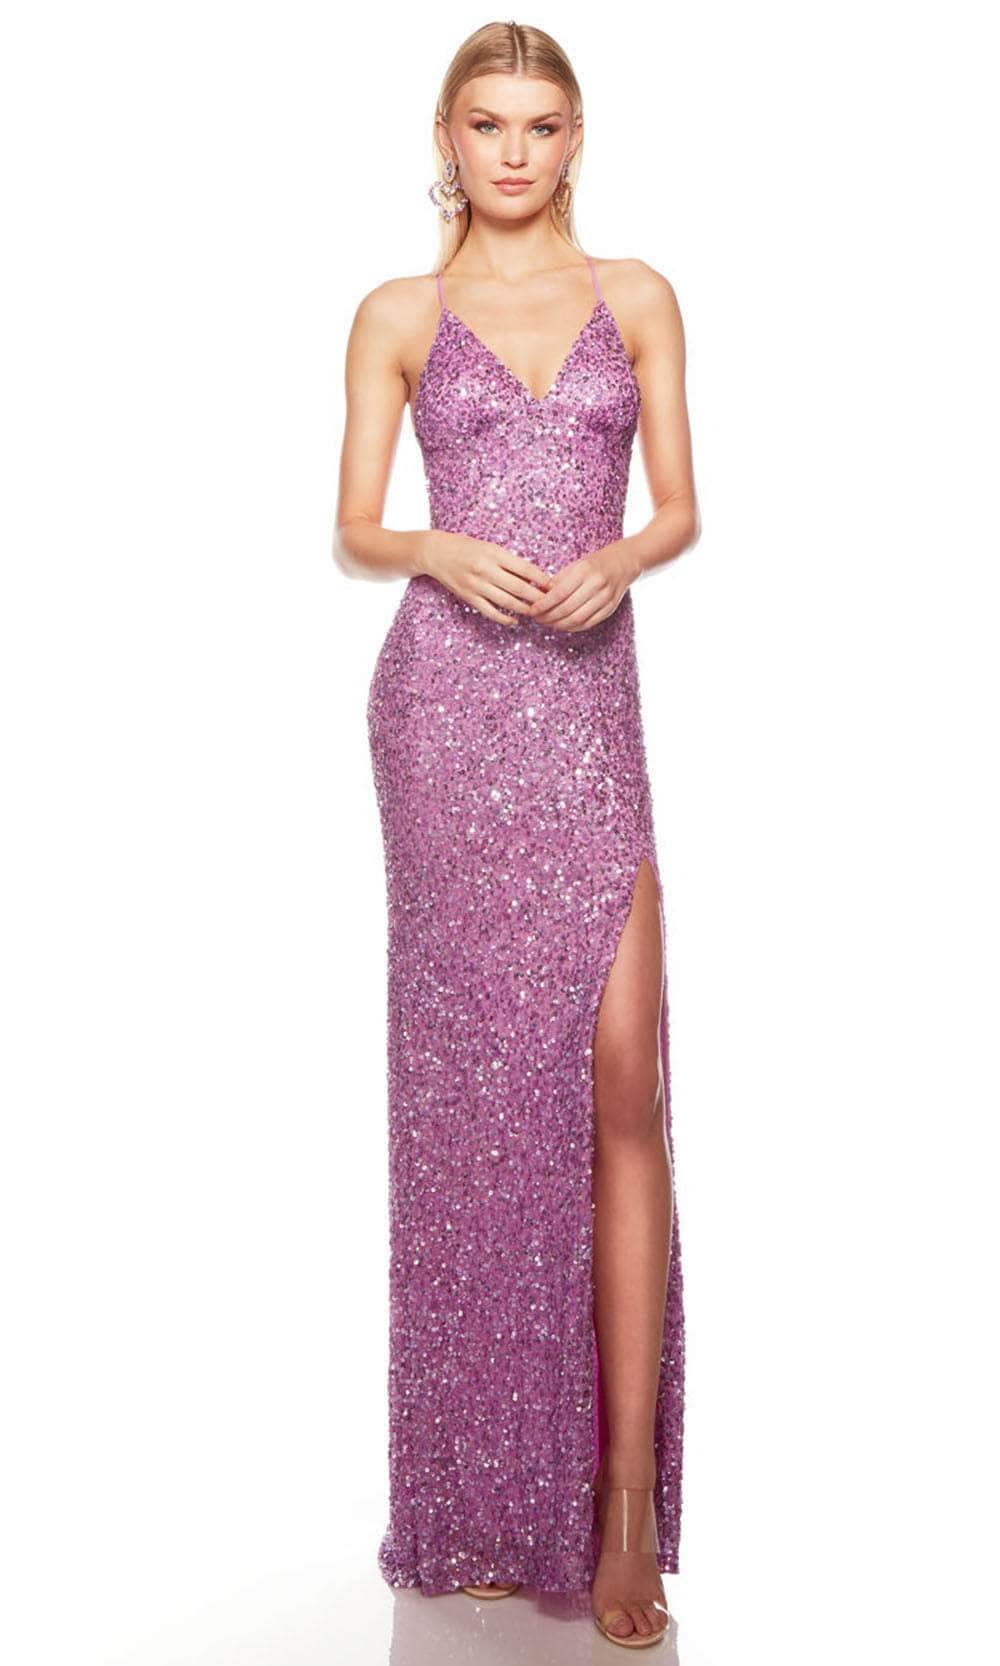 Alyce Paris 88002 - Sequin Sheath Prom Dress with Slit Special Occasion Dress